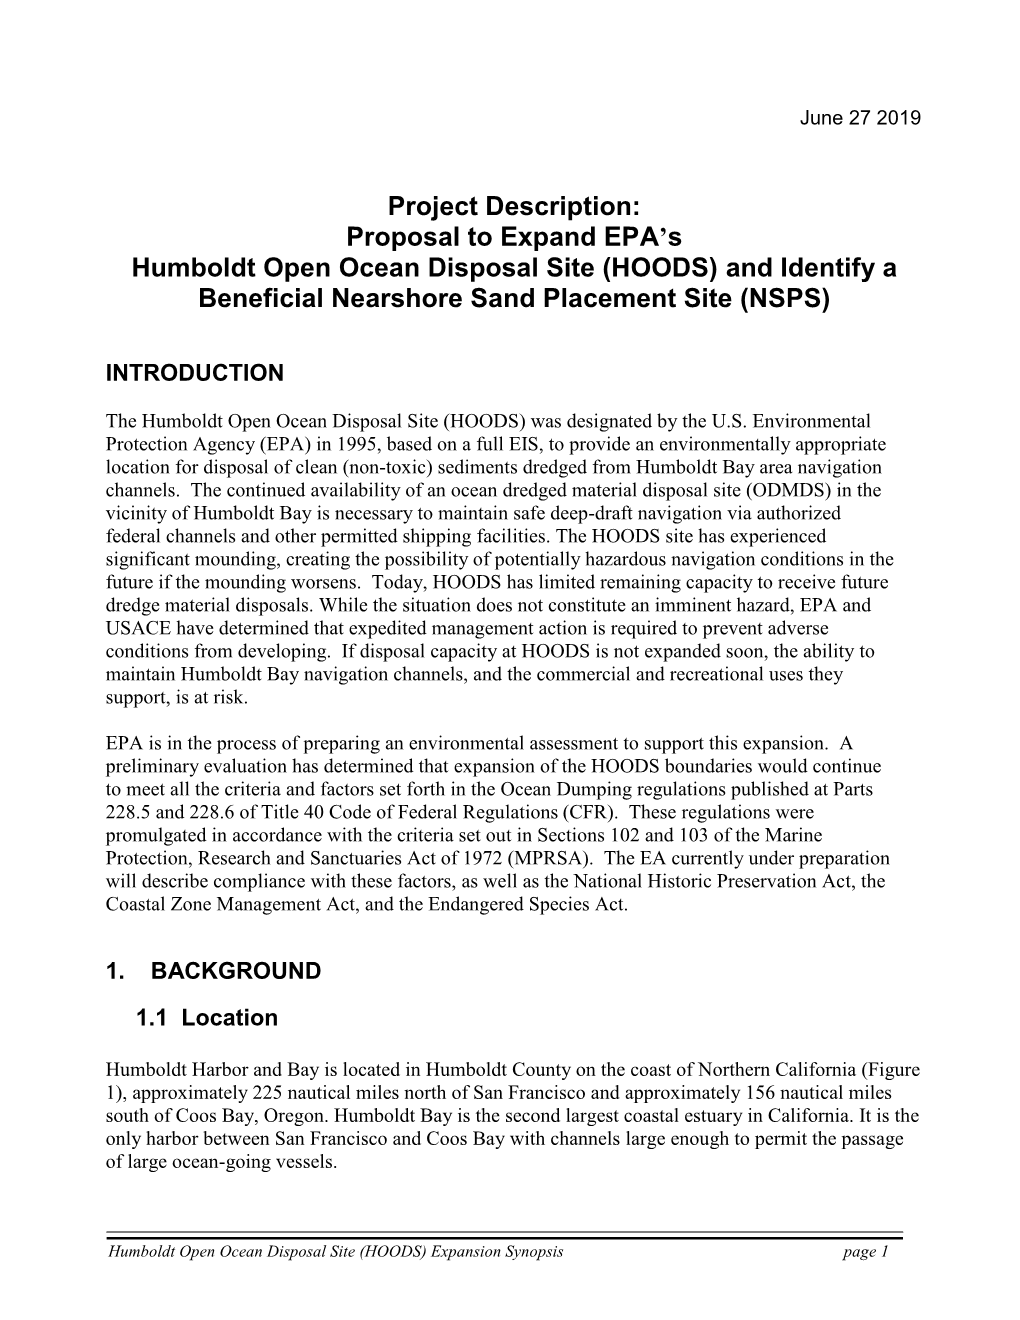 Humboldt Open Ocean Disposal Site (HOODS) Expansion Synopsis Page 1